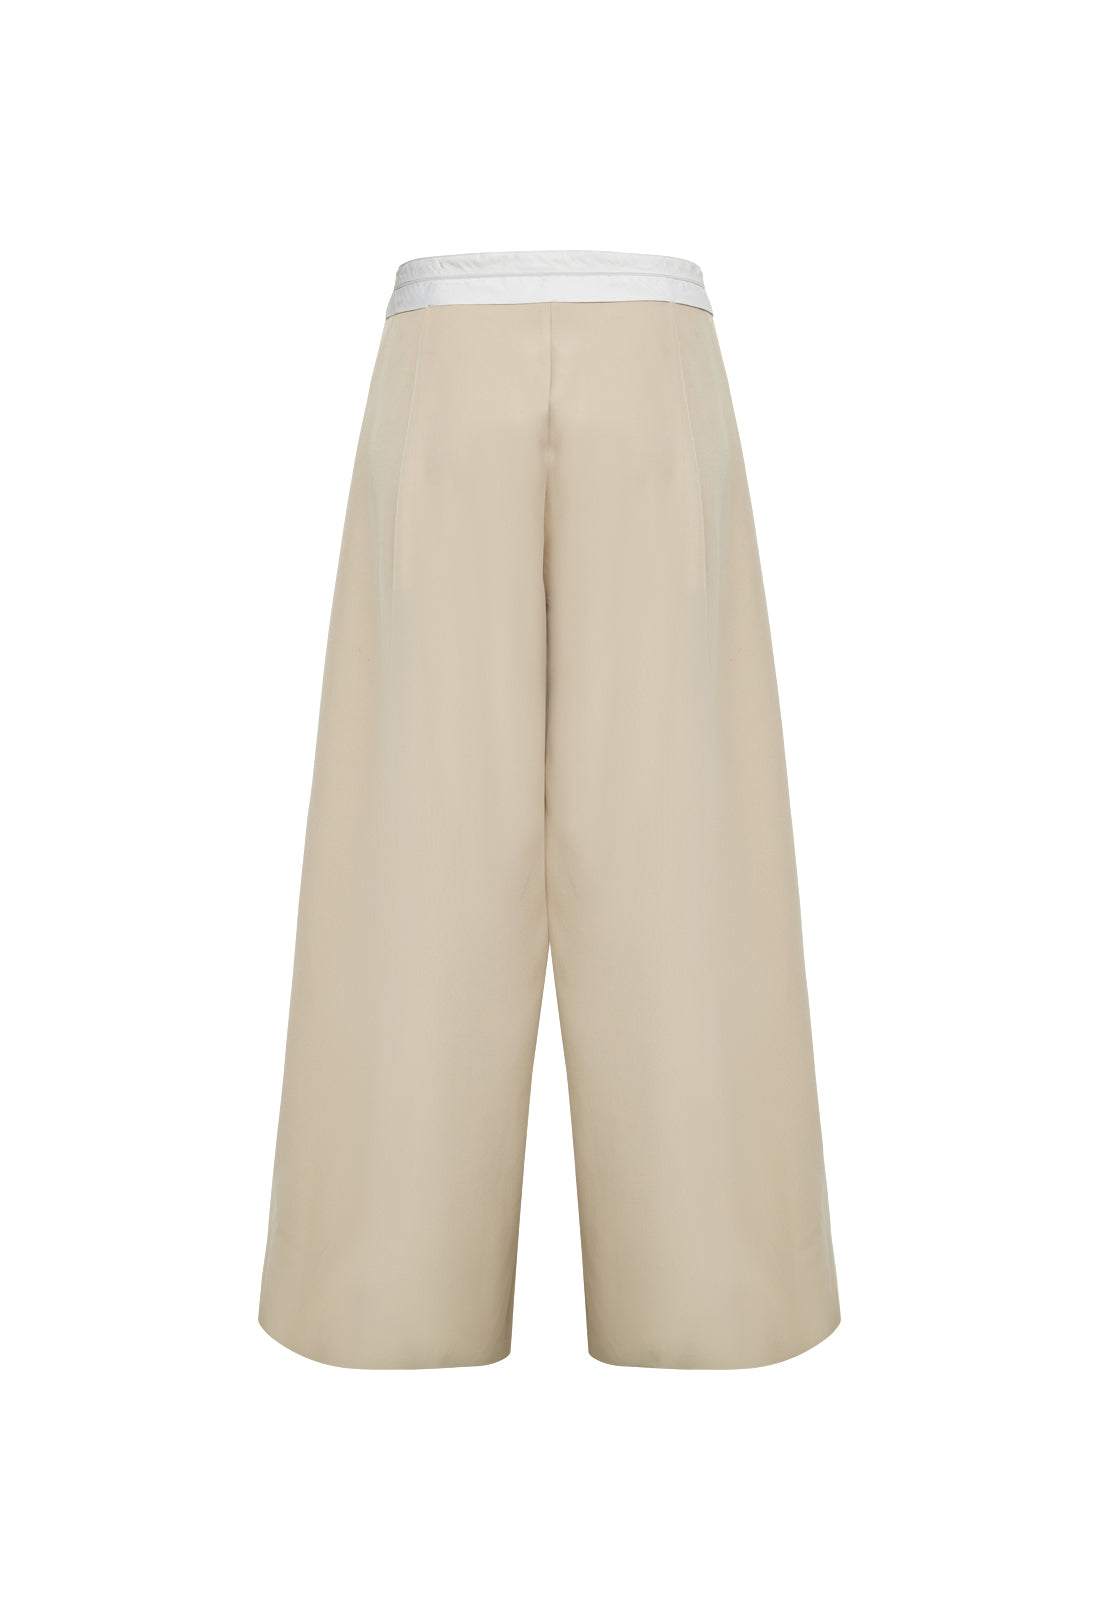 DESIRE PANT - OYSTER